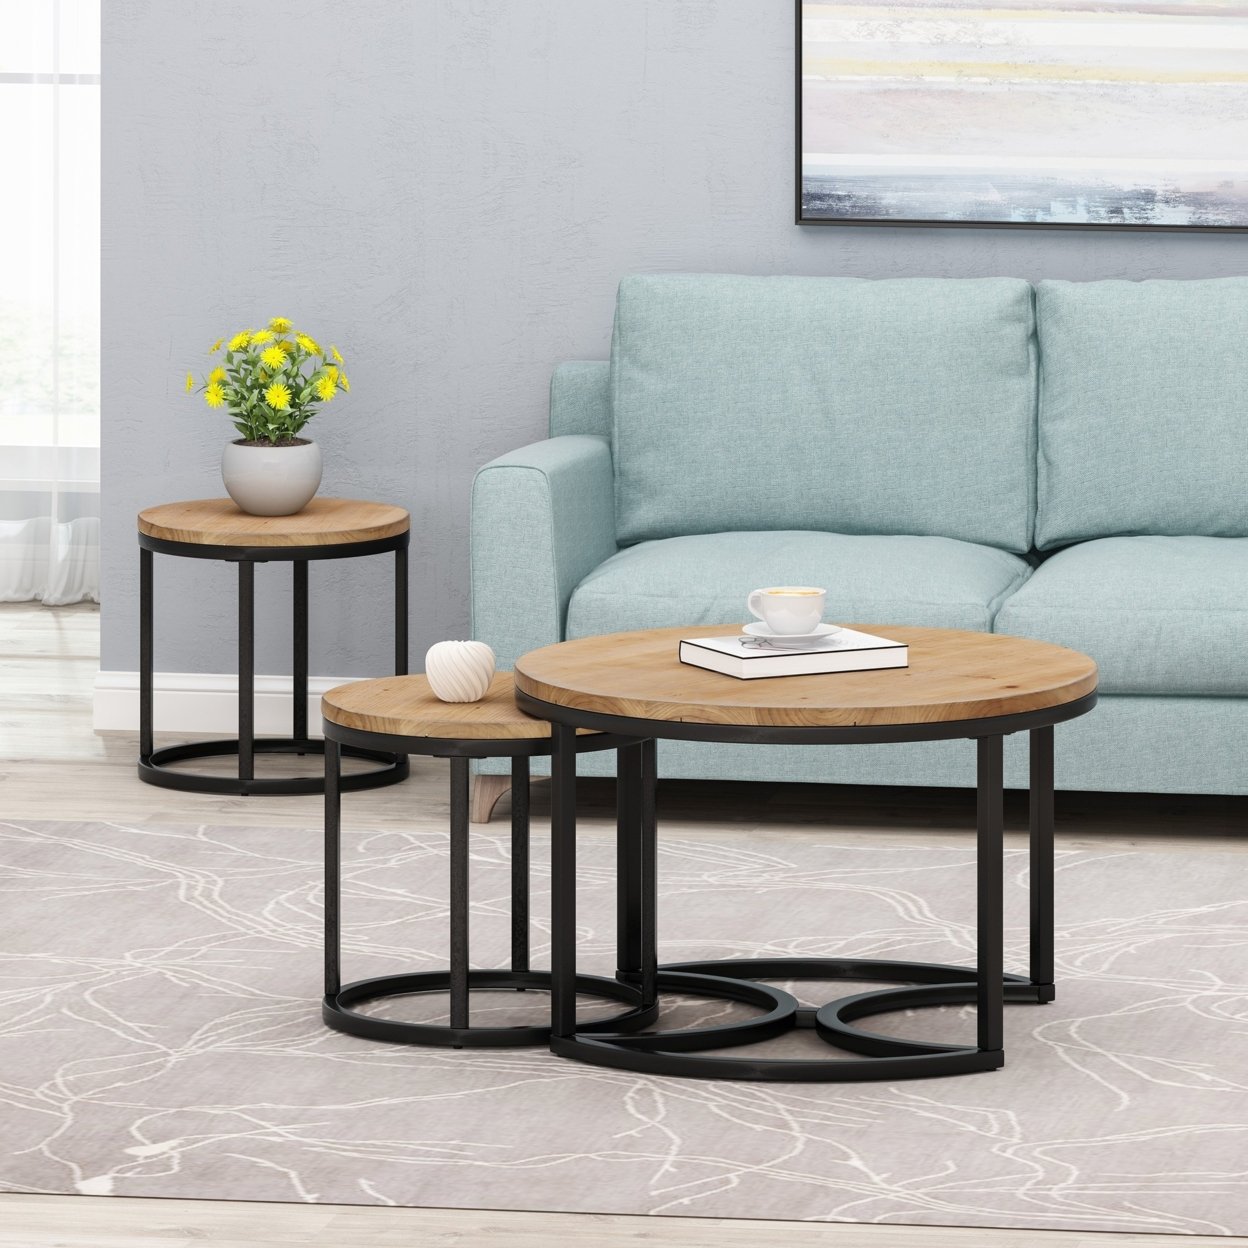 Pia Modern Industrial Coffee Table Set - Gray/pewter